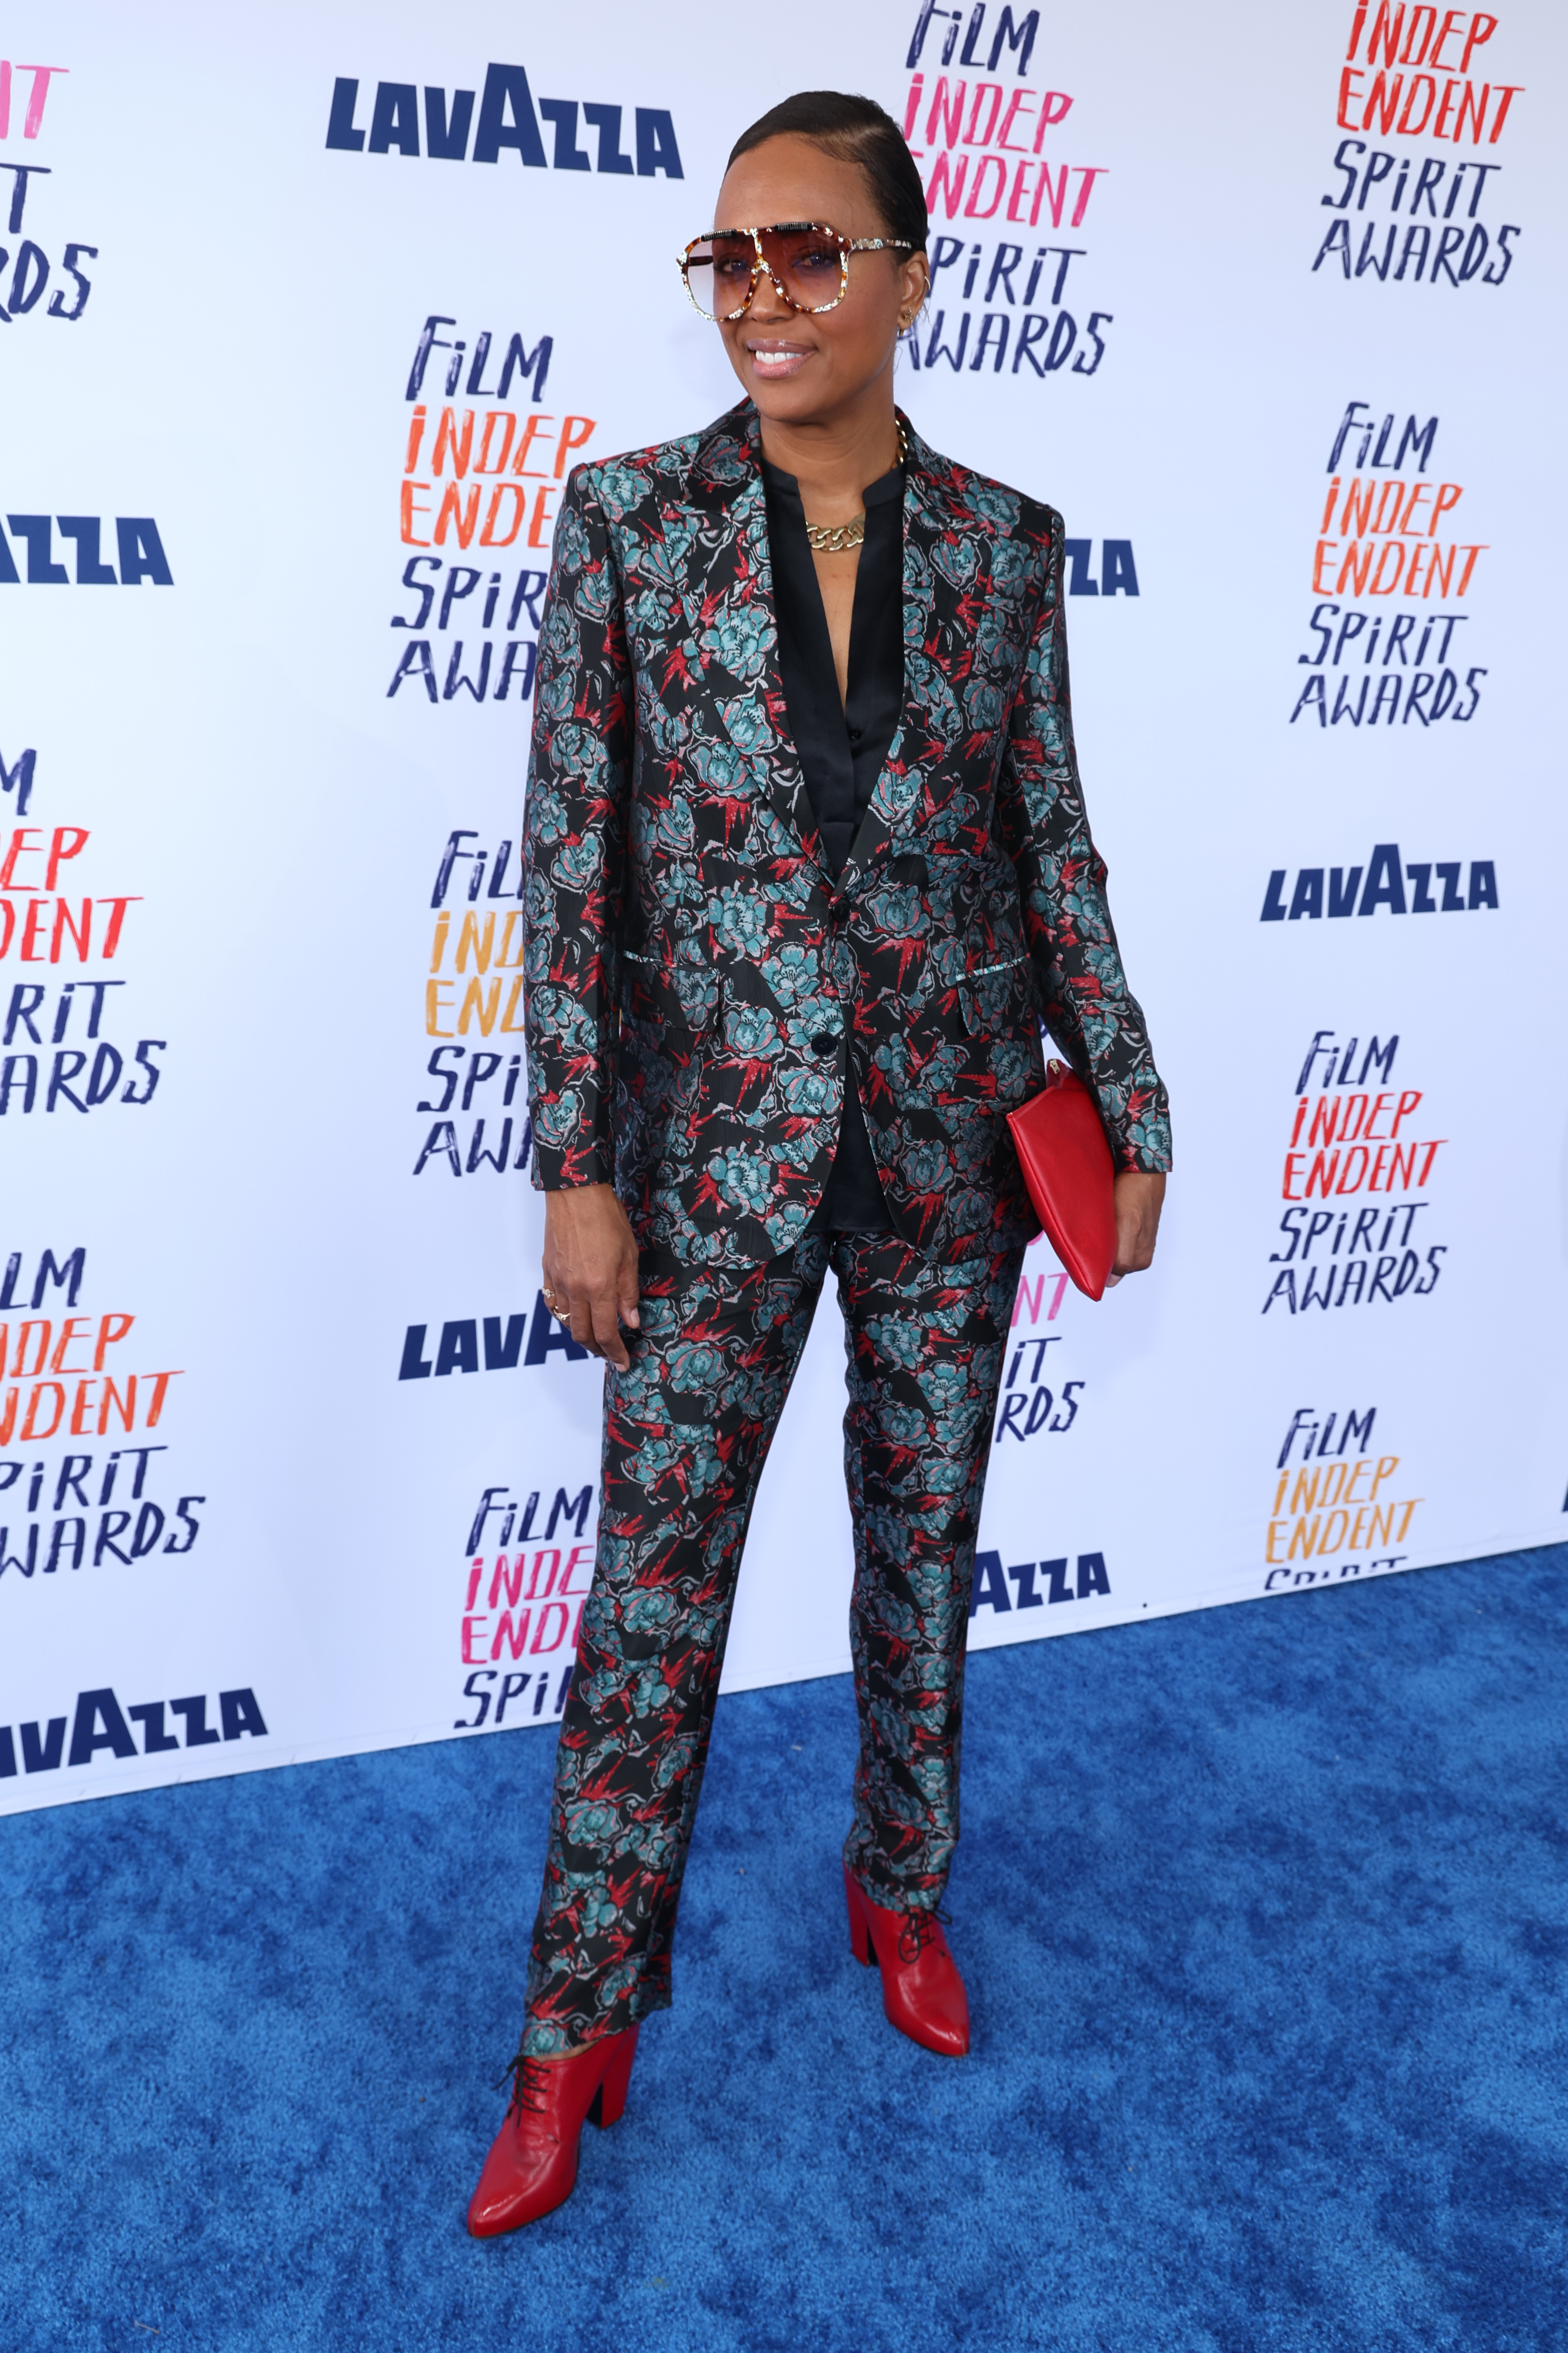 Aisha in patterned suit